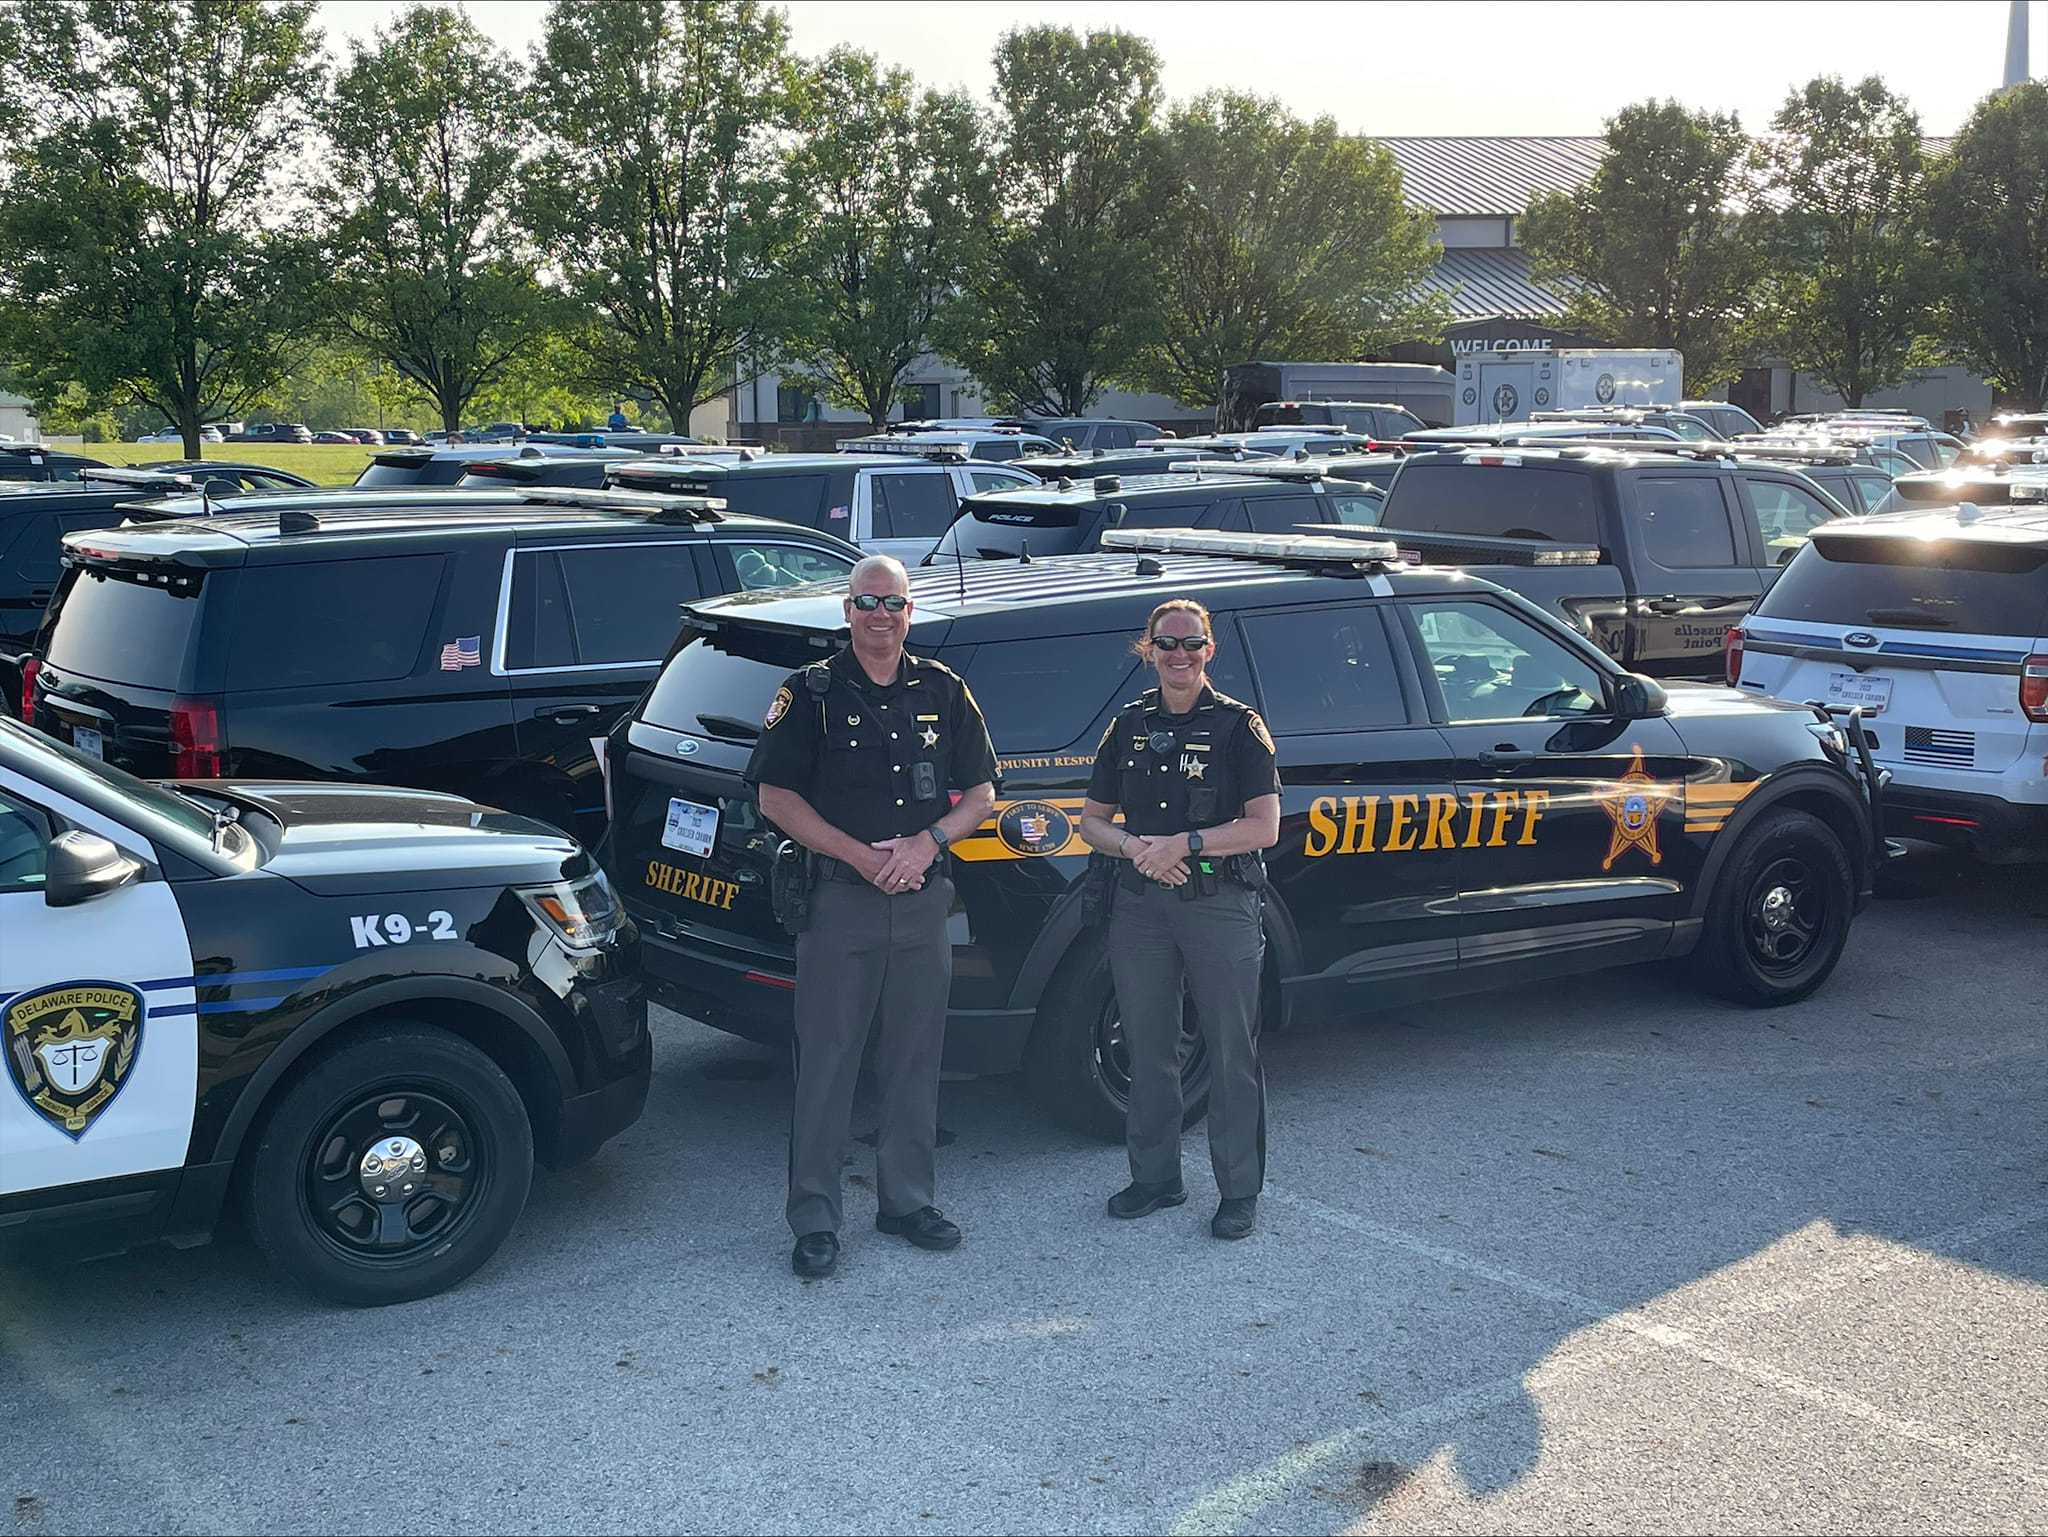 two deputy's standing next to their vehicles